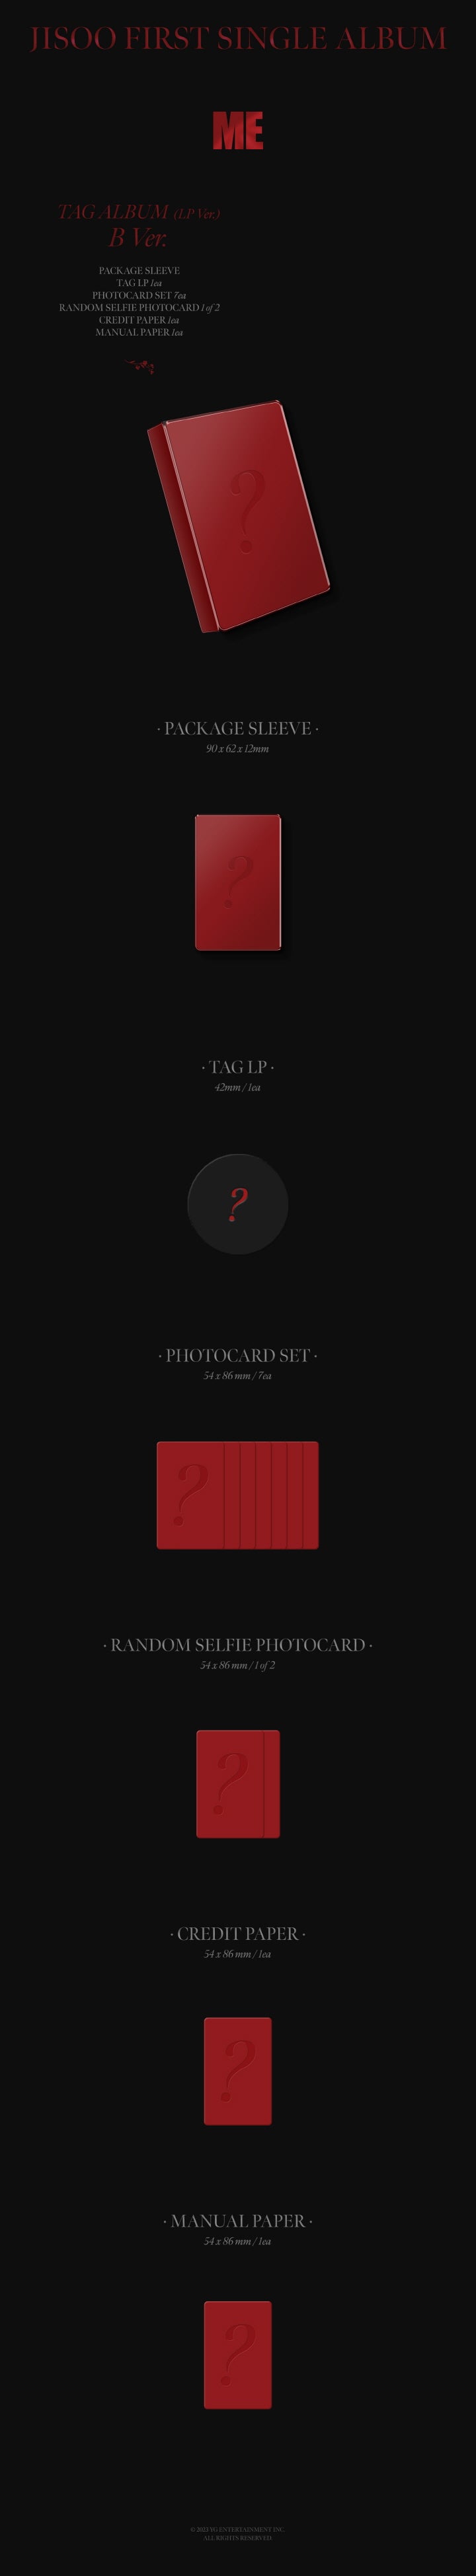 1 Tag  LP
7 Photo Cards
1 Selfie Photo Card (random out of 2 types)
1 Credit Paper
1 Manual Paper